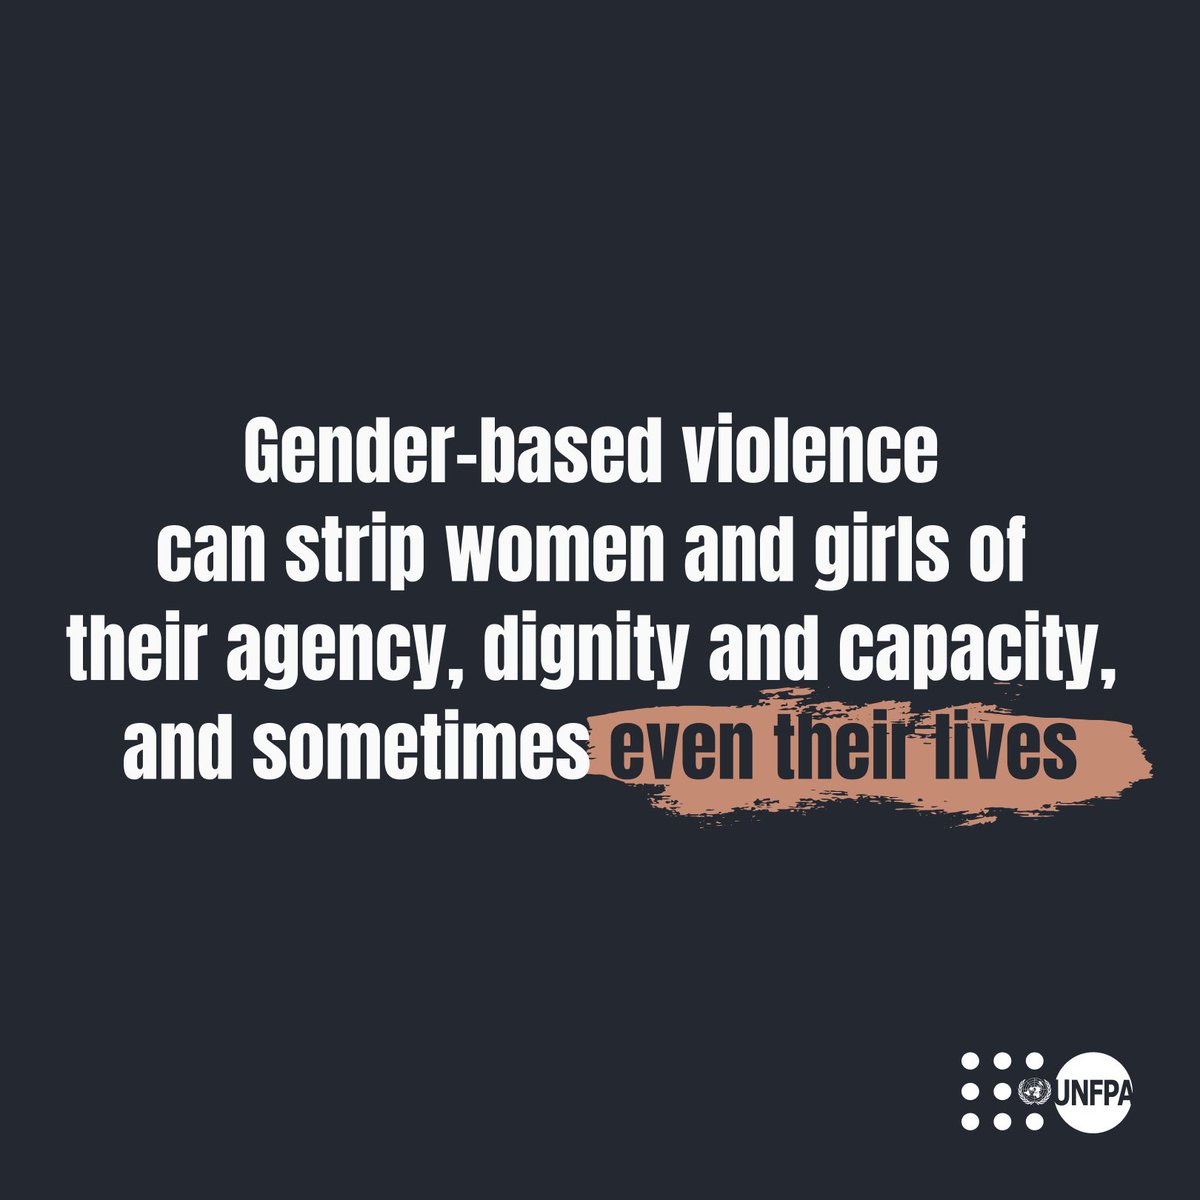 Let’s be clear:

Any type of harmful practice against a woman or a girl is gender-based violence.

And it should never happen.

See what @UNFPA is doing to #ENDviolence worldwide: unf.pa/gbvd

#GlobalGoals